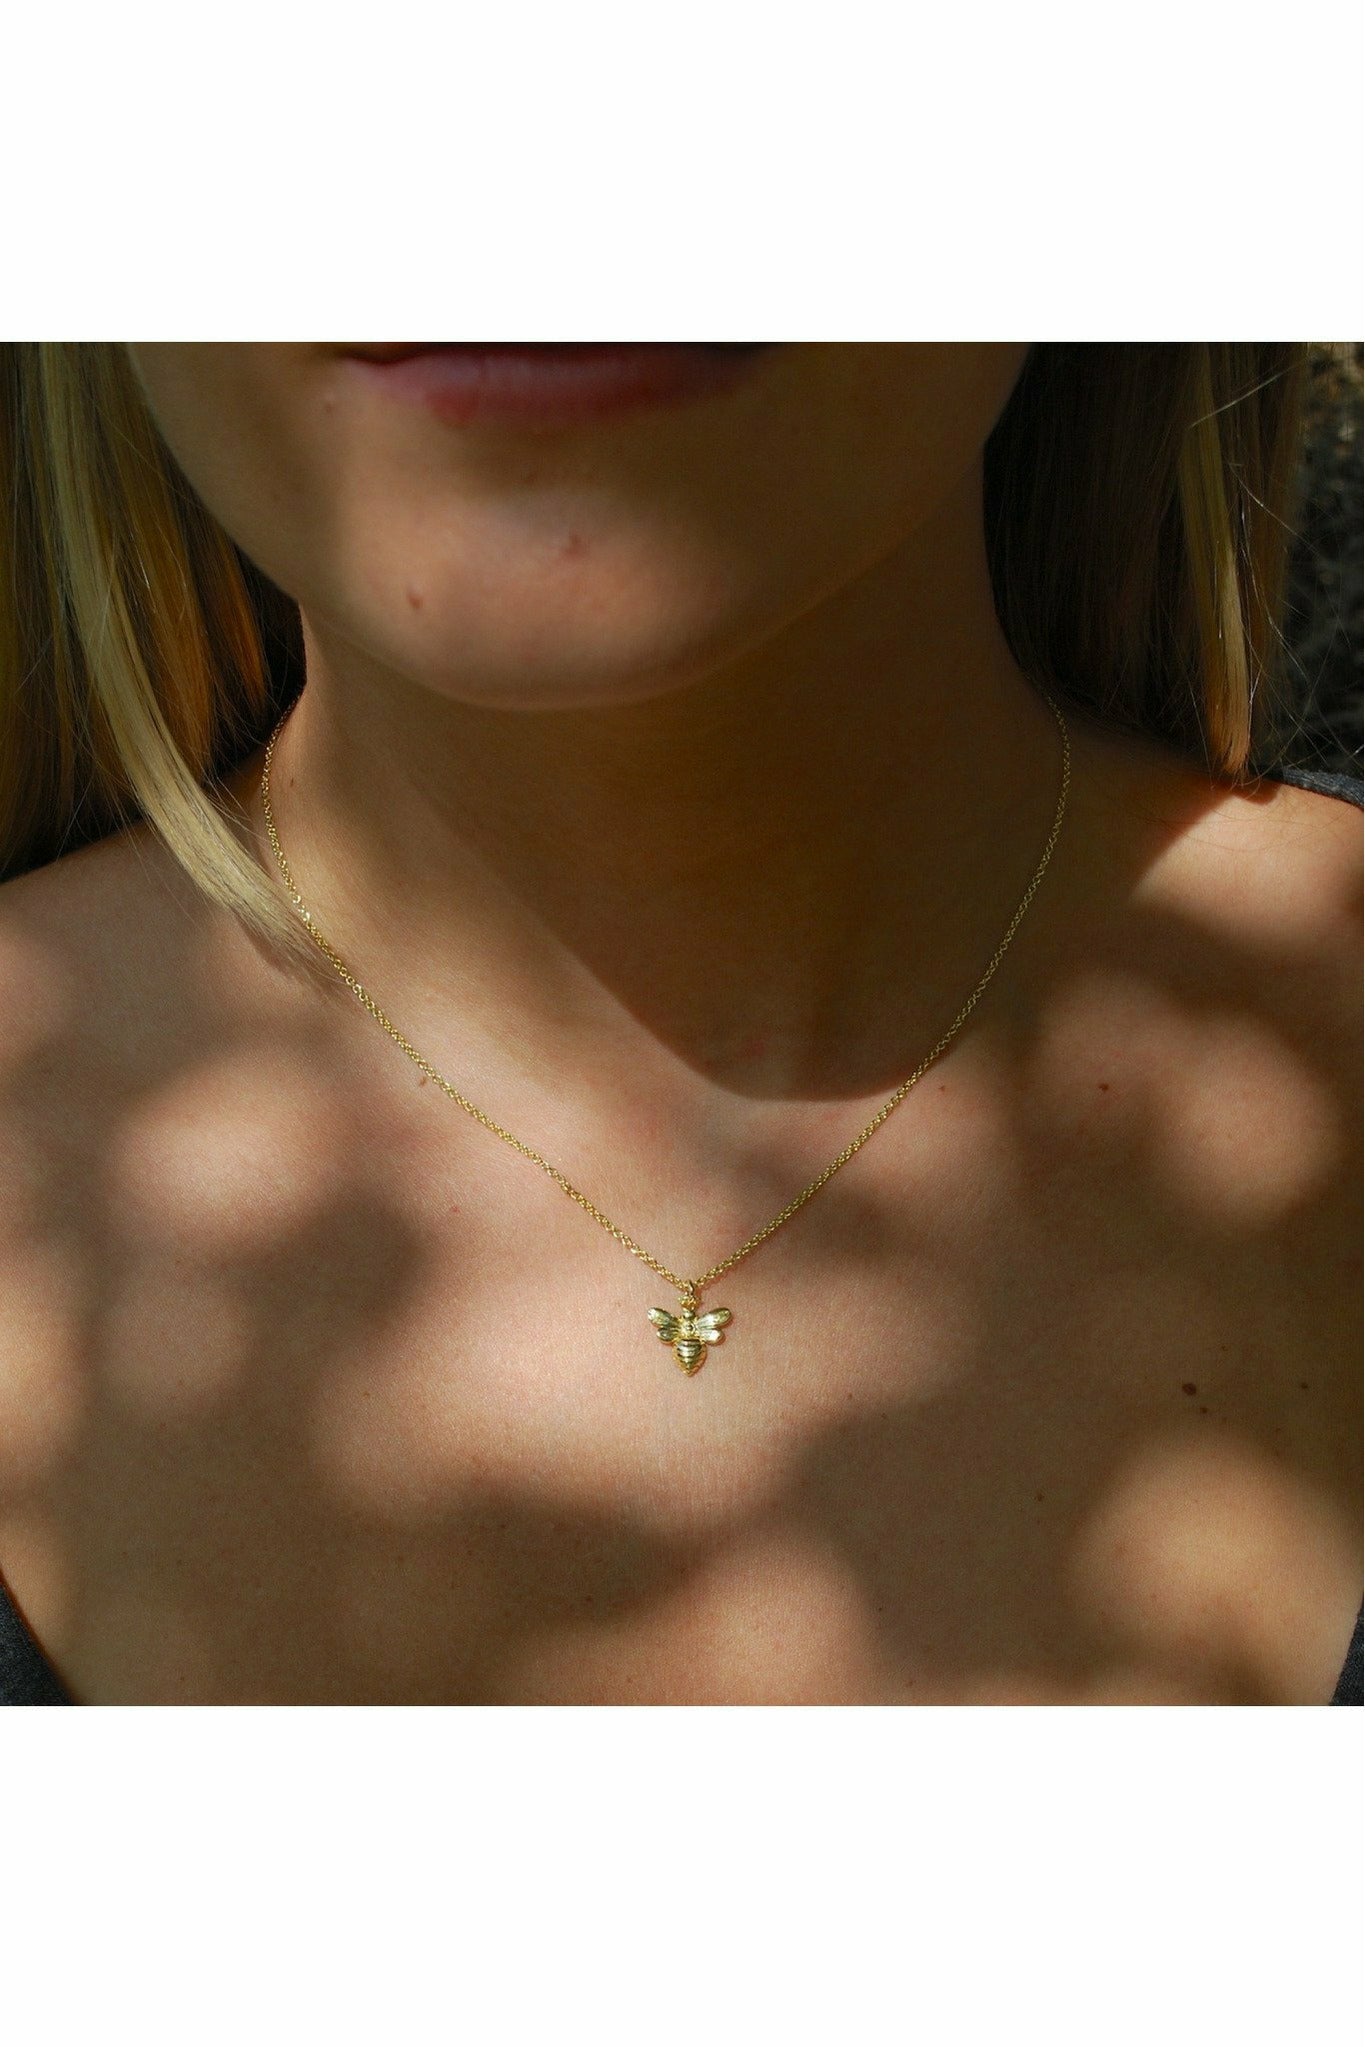 Little bee necklace in satin gold NLK29G